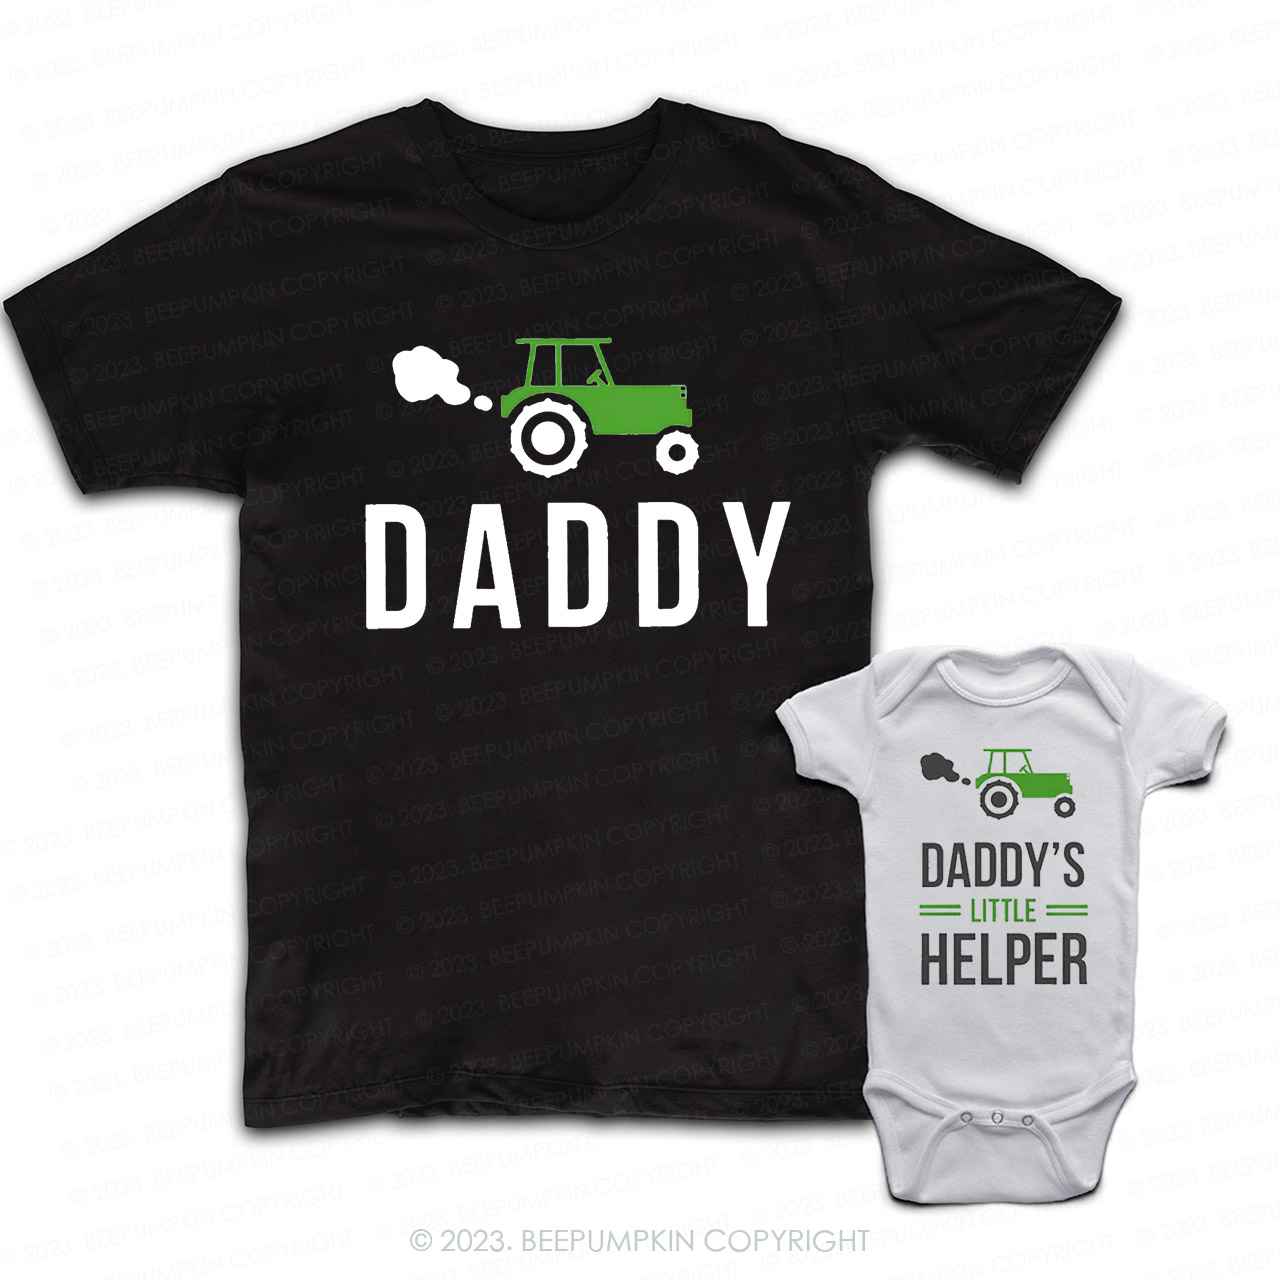 Daddy And Daddy's Little Helper Matching T-Shirts For Dad&Me